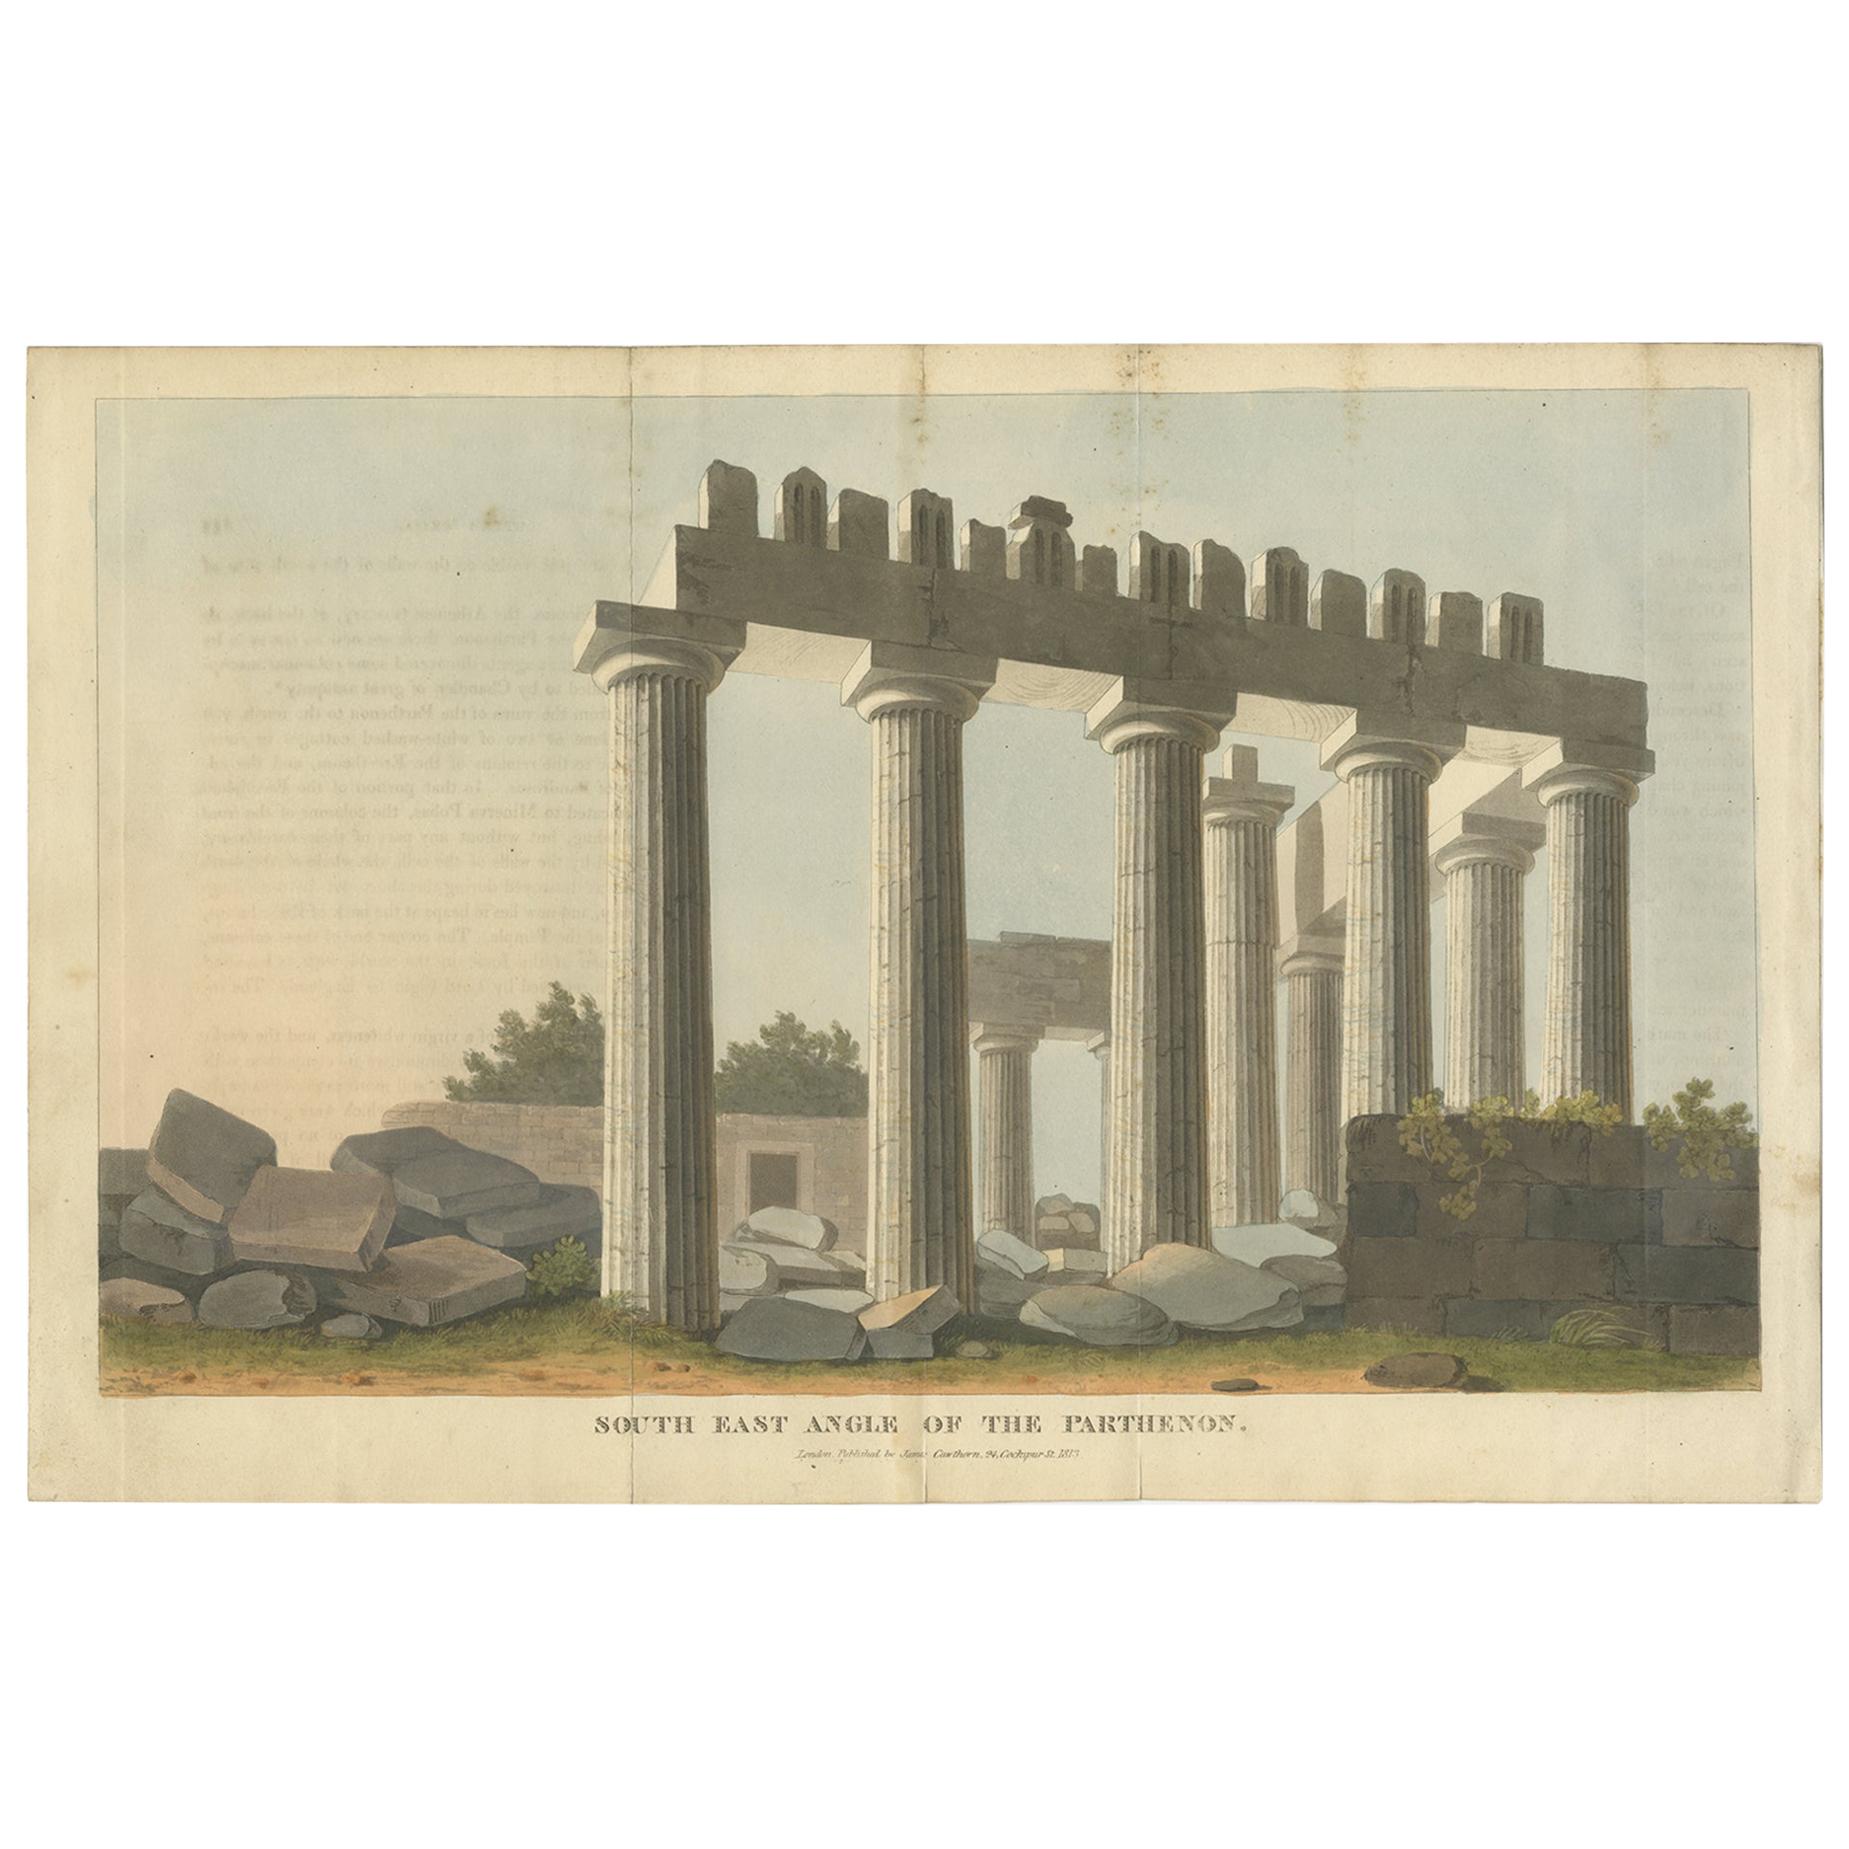 Antique Print of the Parthenon Temple by Hobhouse, 1813